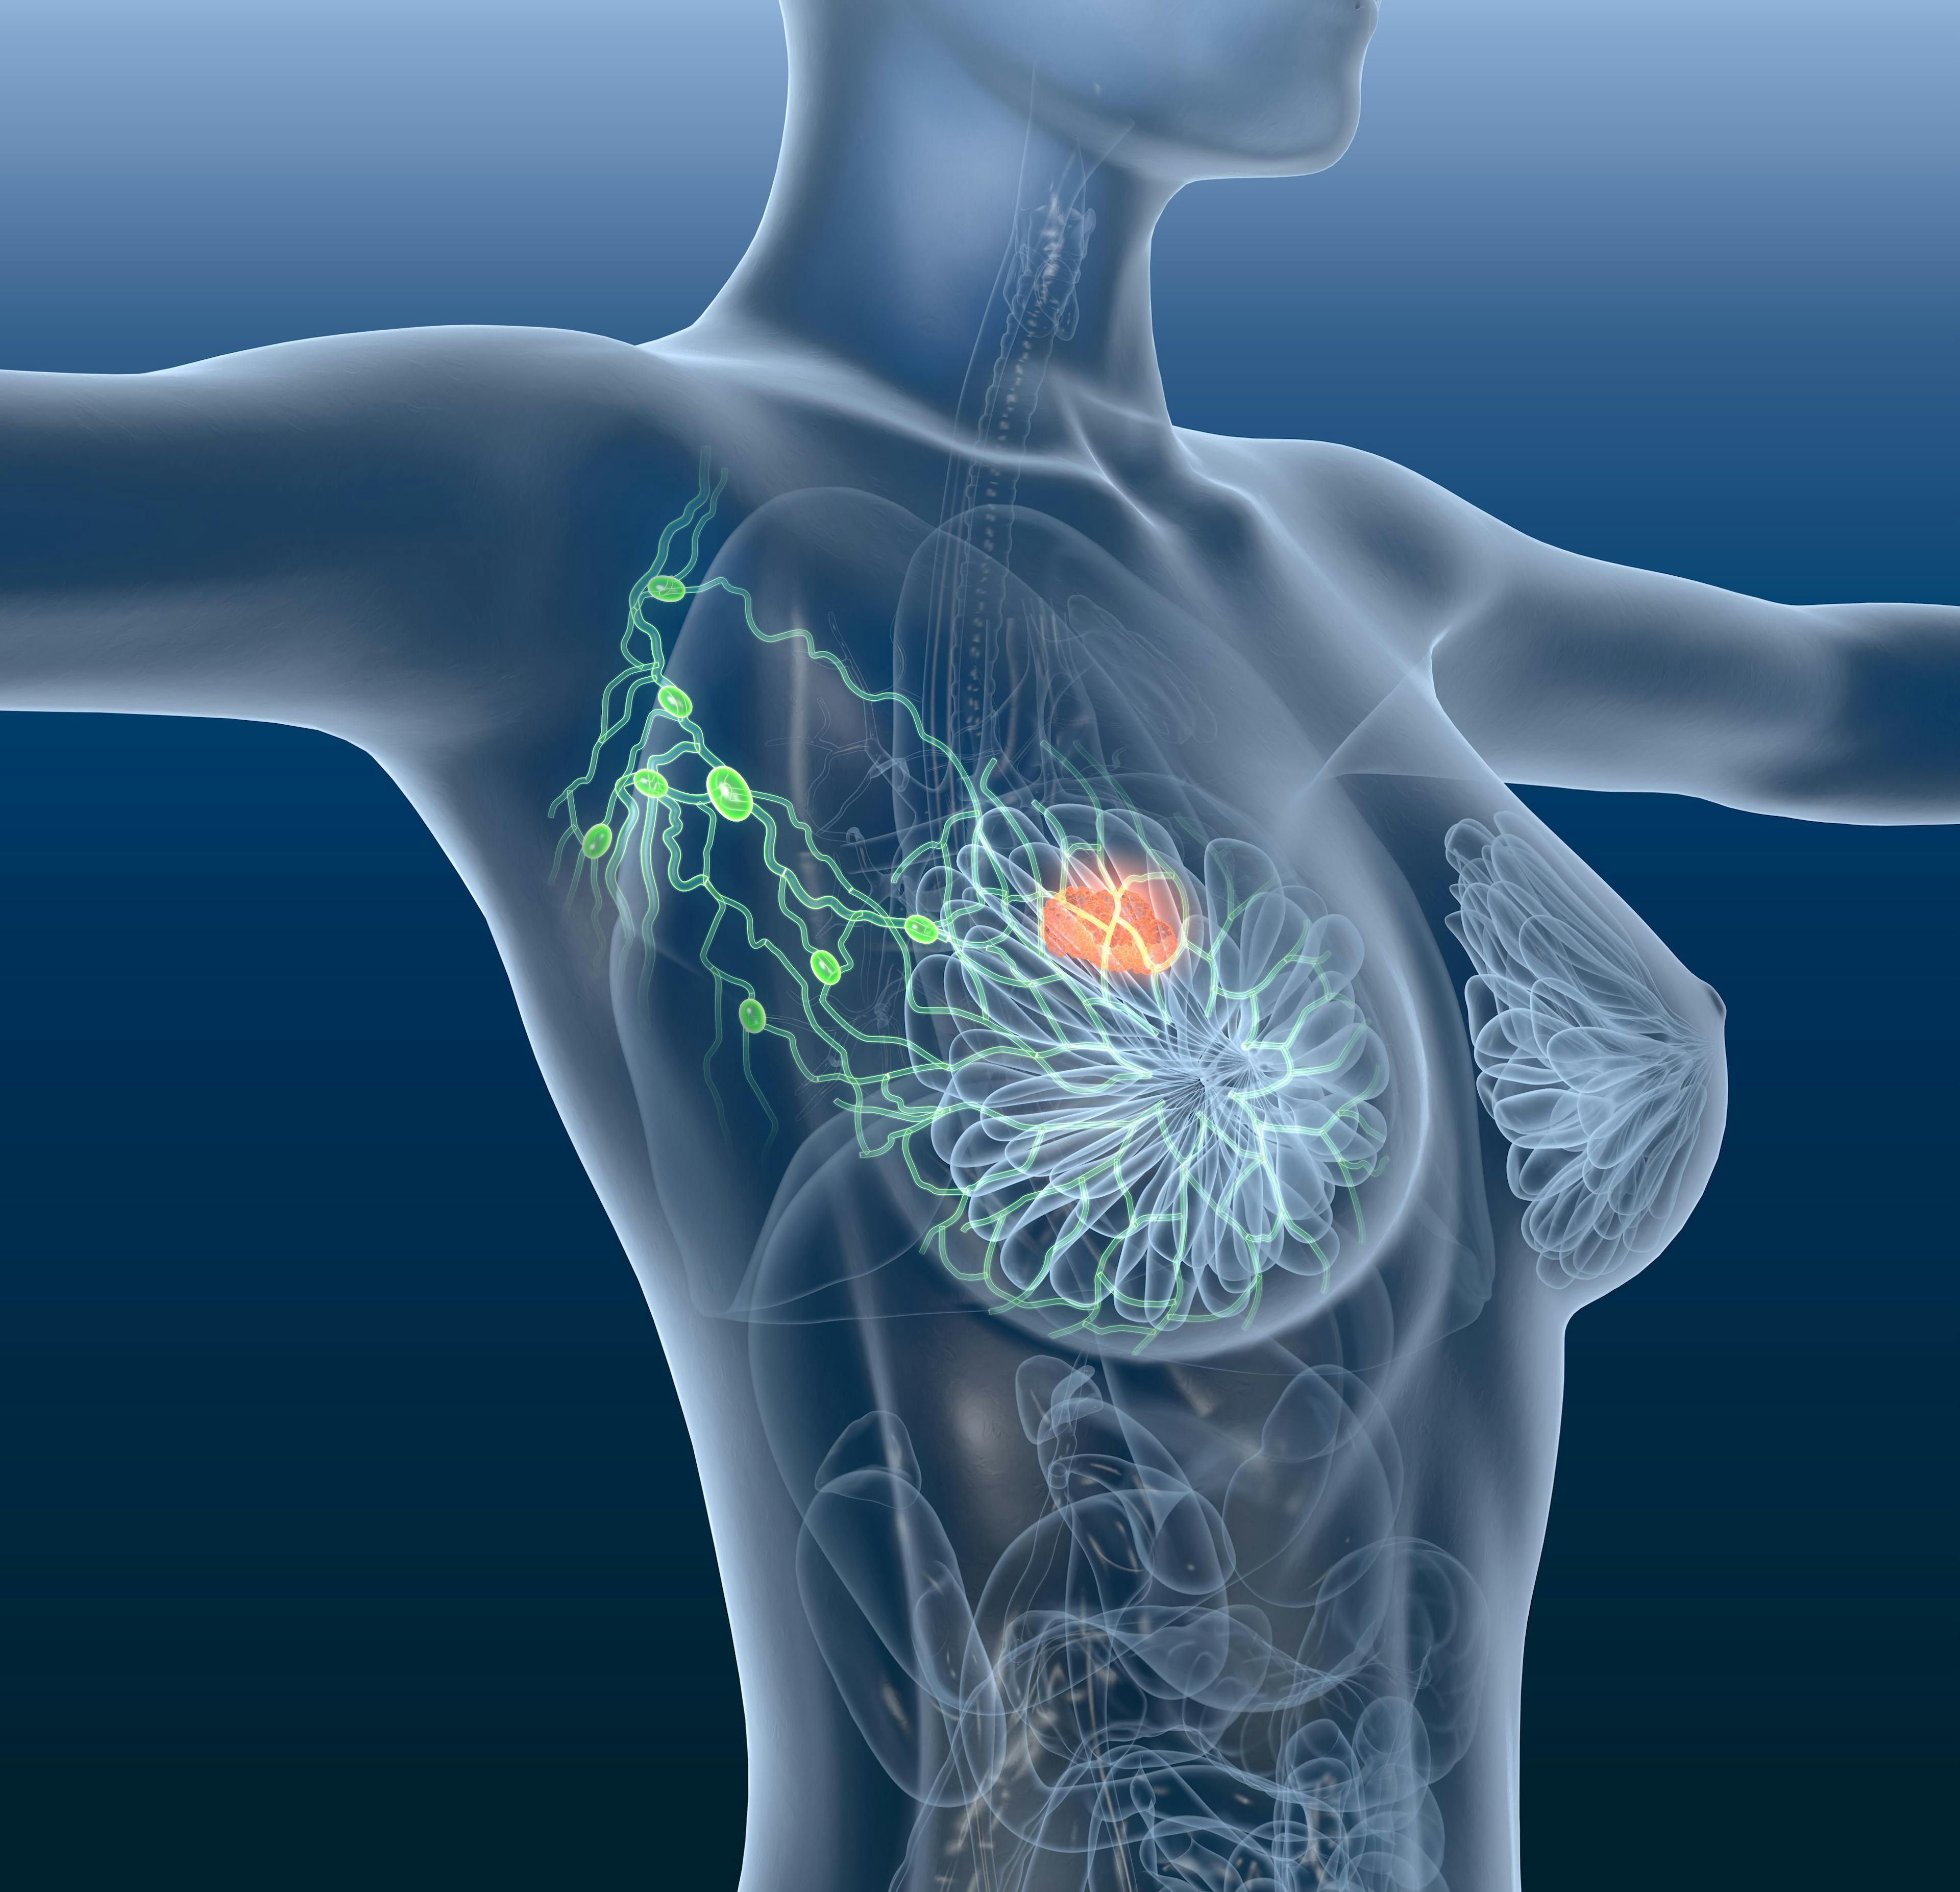 Novel, Emerging Therapies for HER2+ Metastatic Breast Cancer